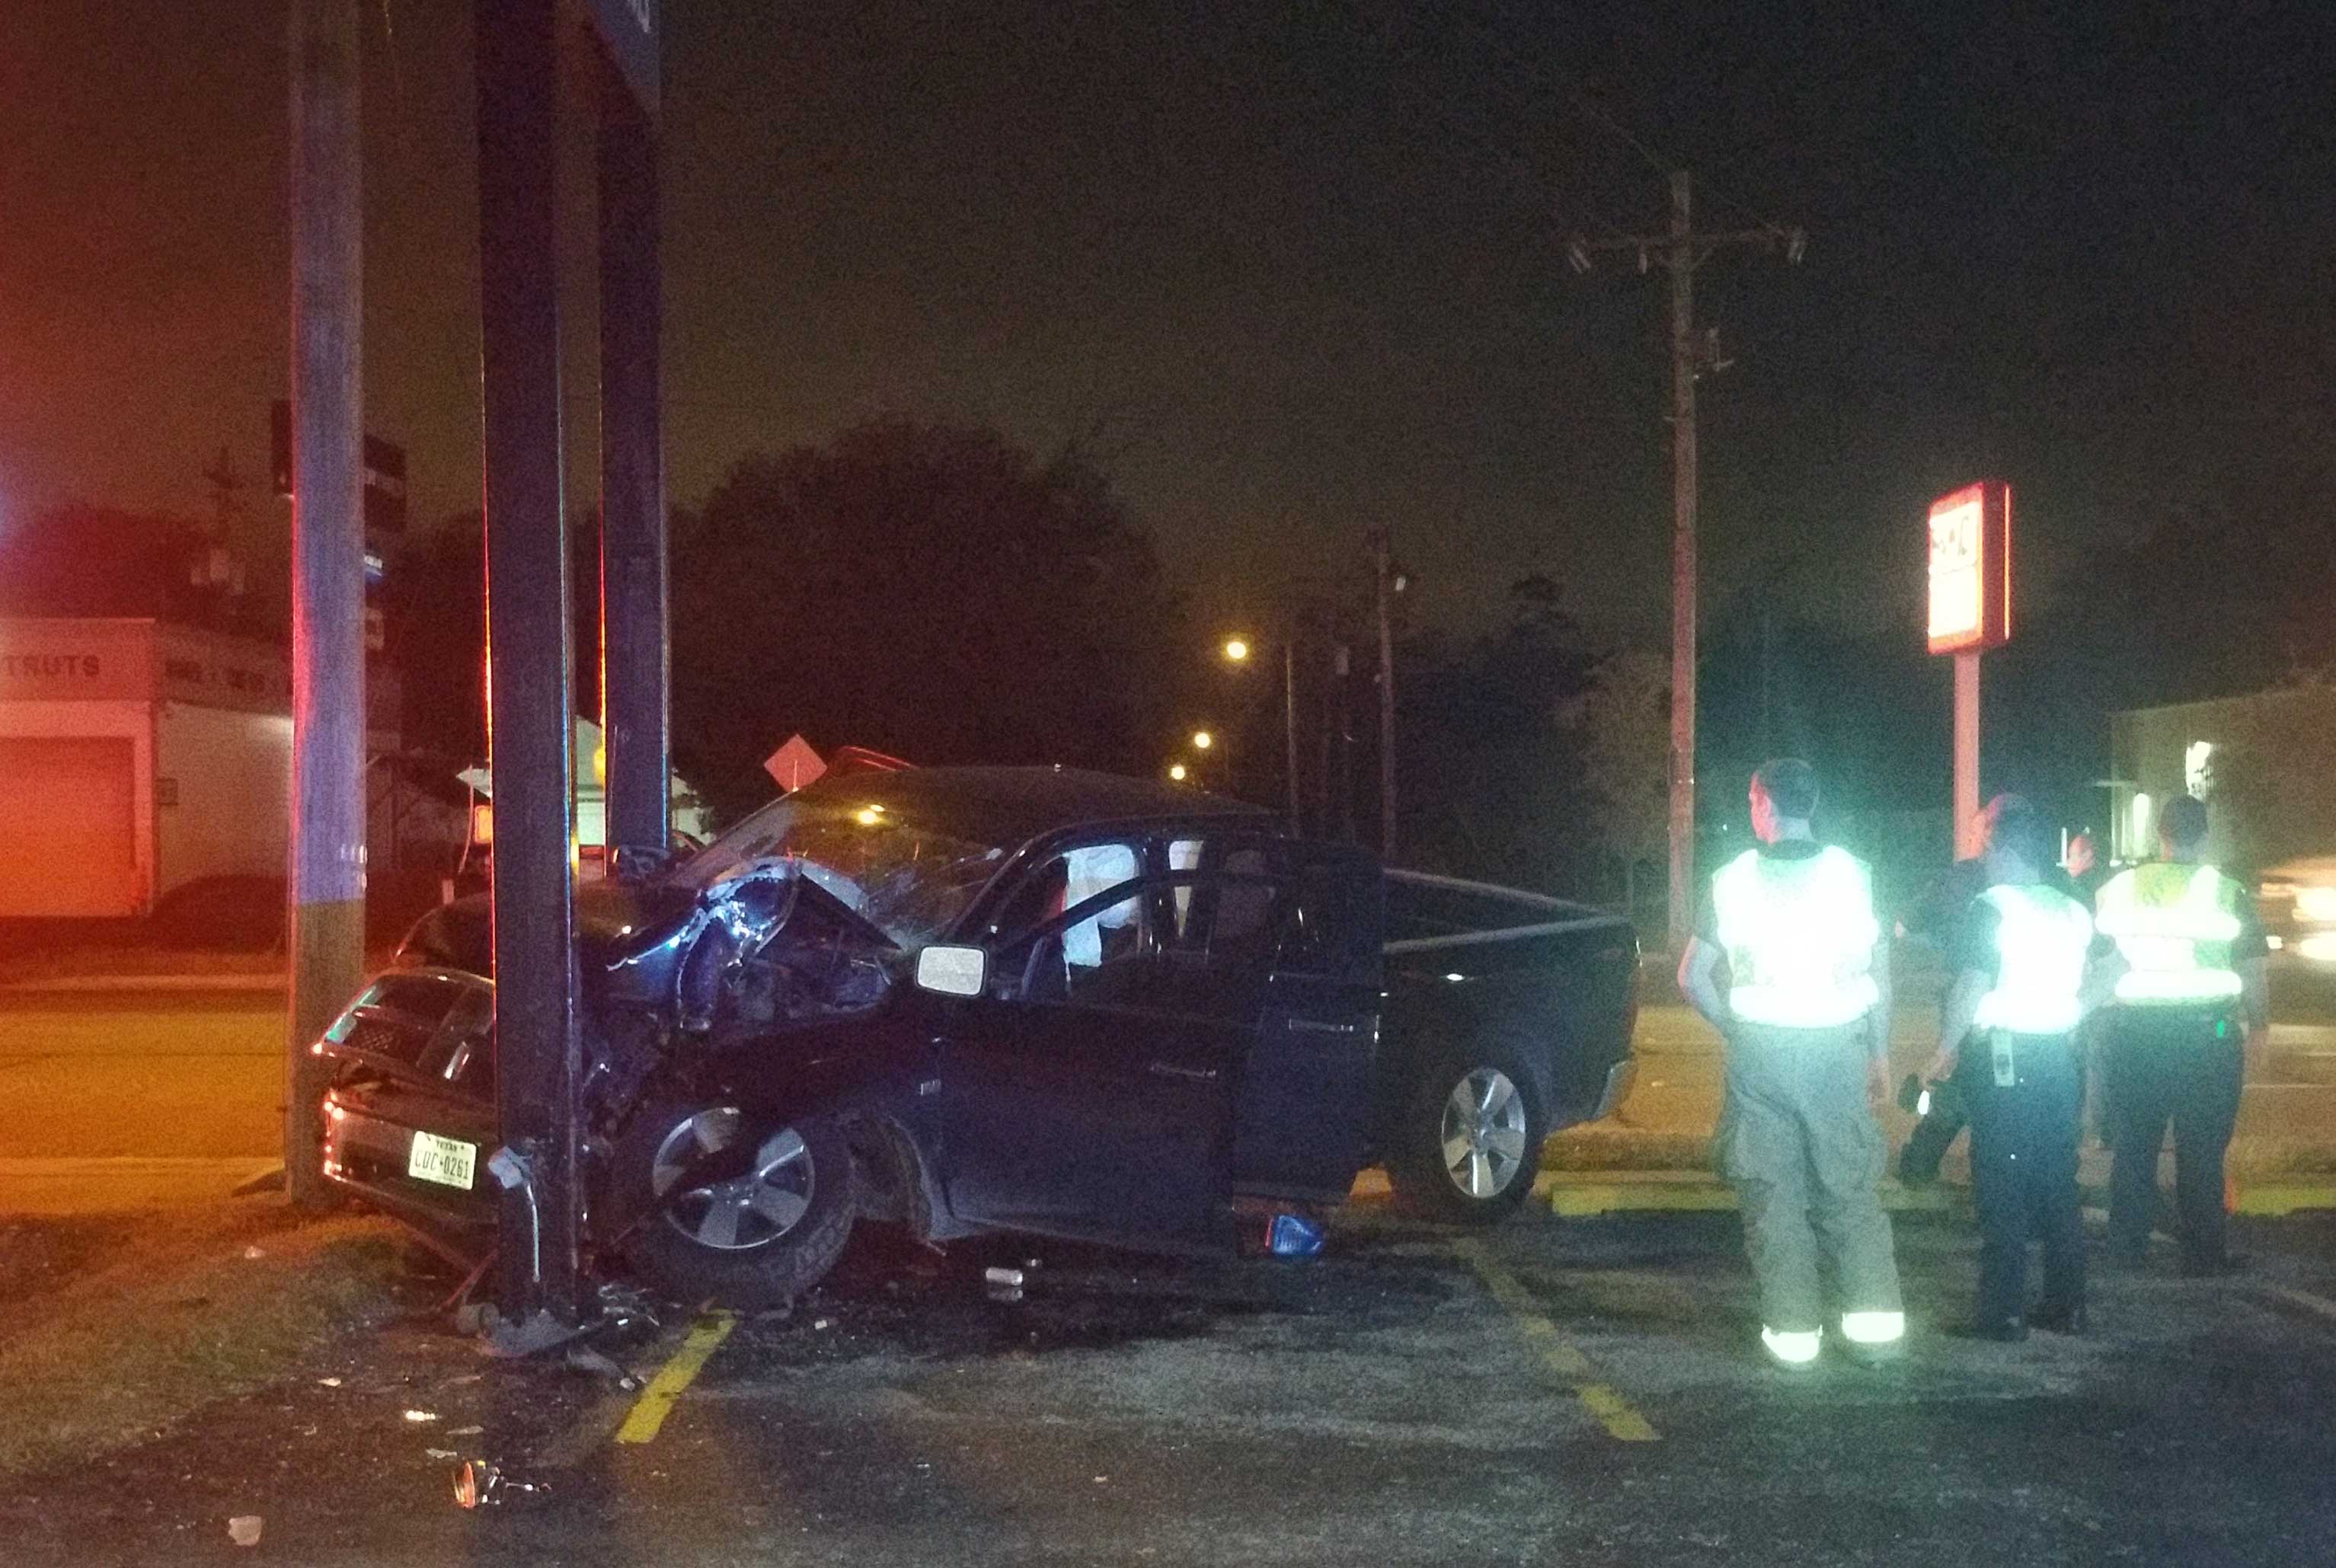 Driver loses consciousness in wreck on 16th Street - Orange Leader ...